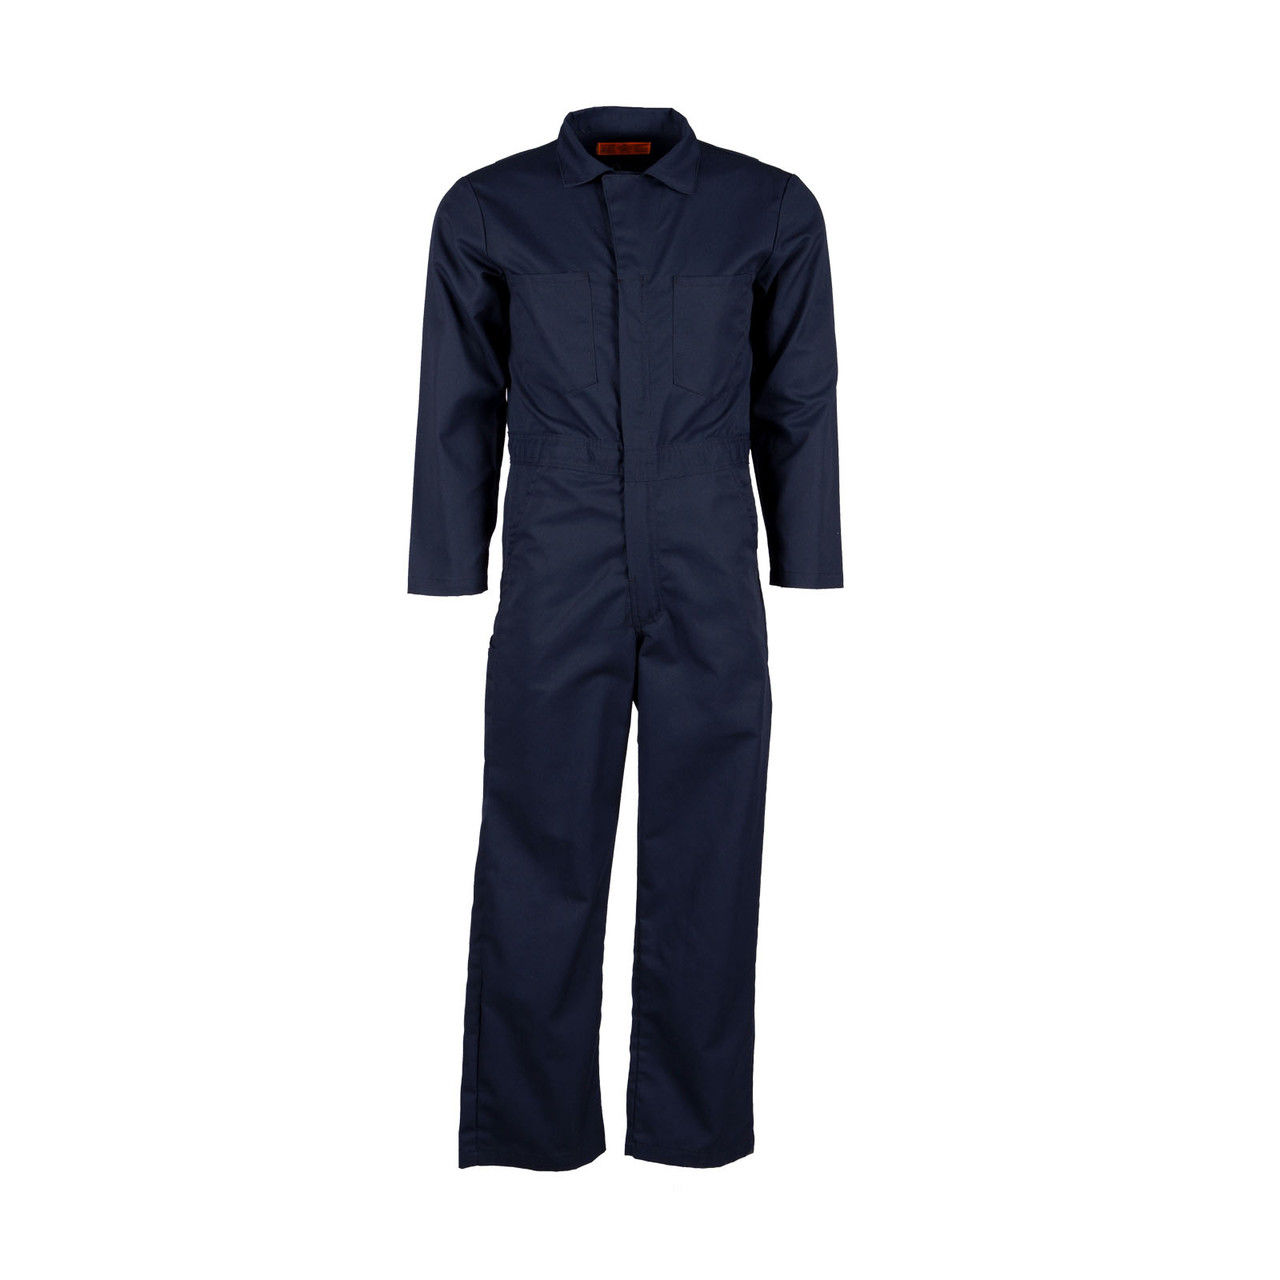 CV10NV Navy Coverall by Pinnacle Textile Questions & Answers